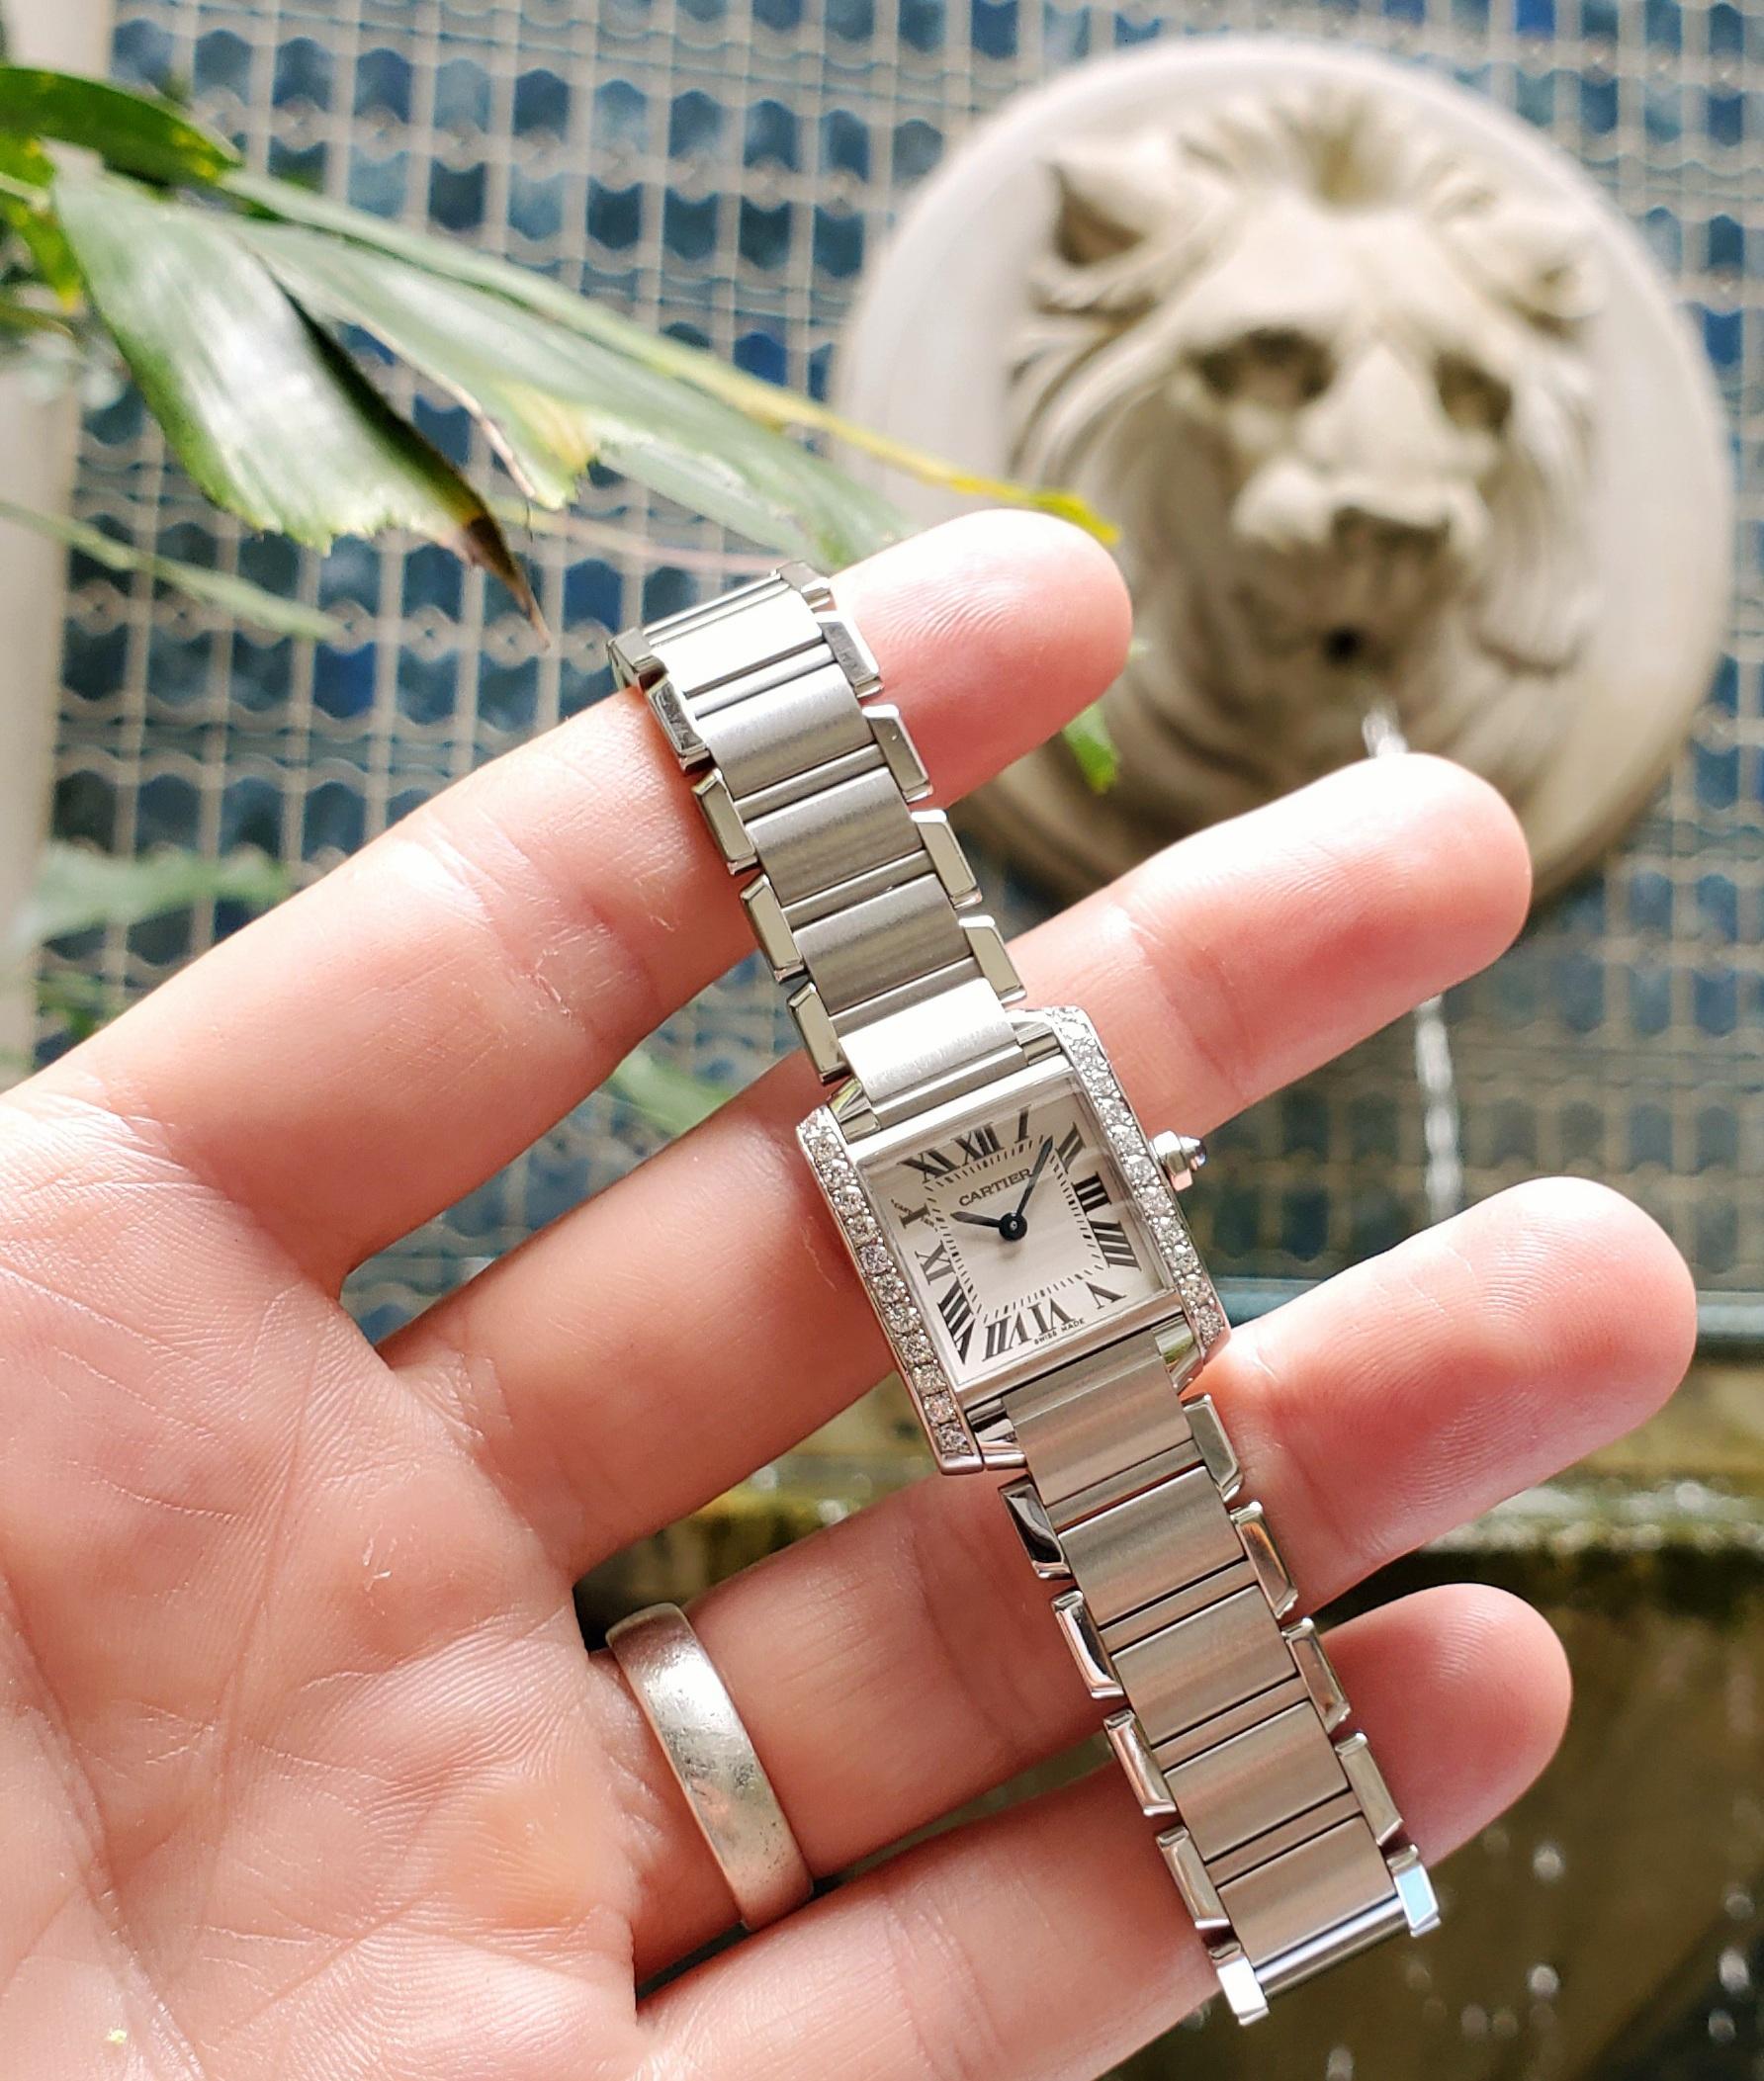 Vintage Stainless Steel Cartier Tank Francaise timepiece, small case size. This beautiful timepiece has diamonds added to the bezel surround. Classic Cartier, this sleek and elegant timepiece transitions from jeans and your favorite tee, to a